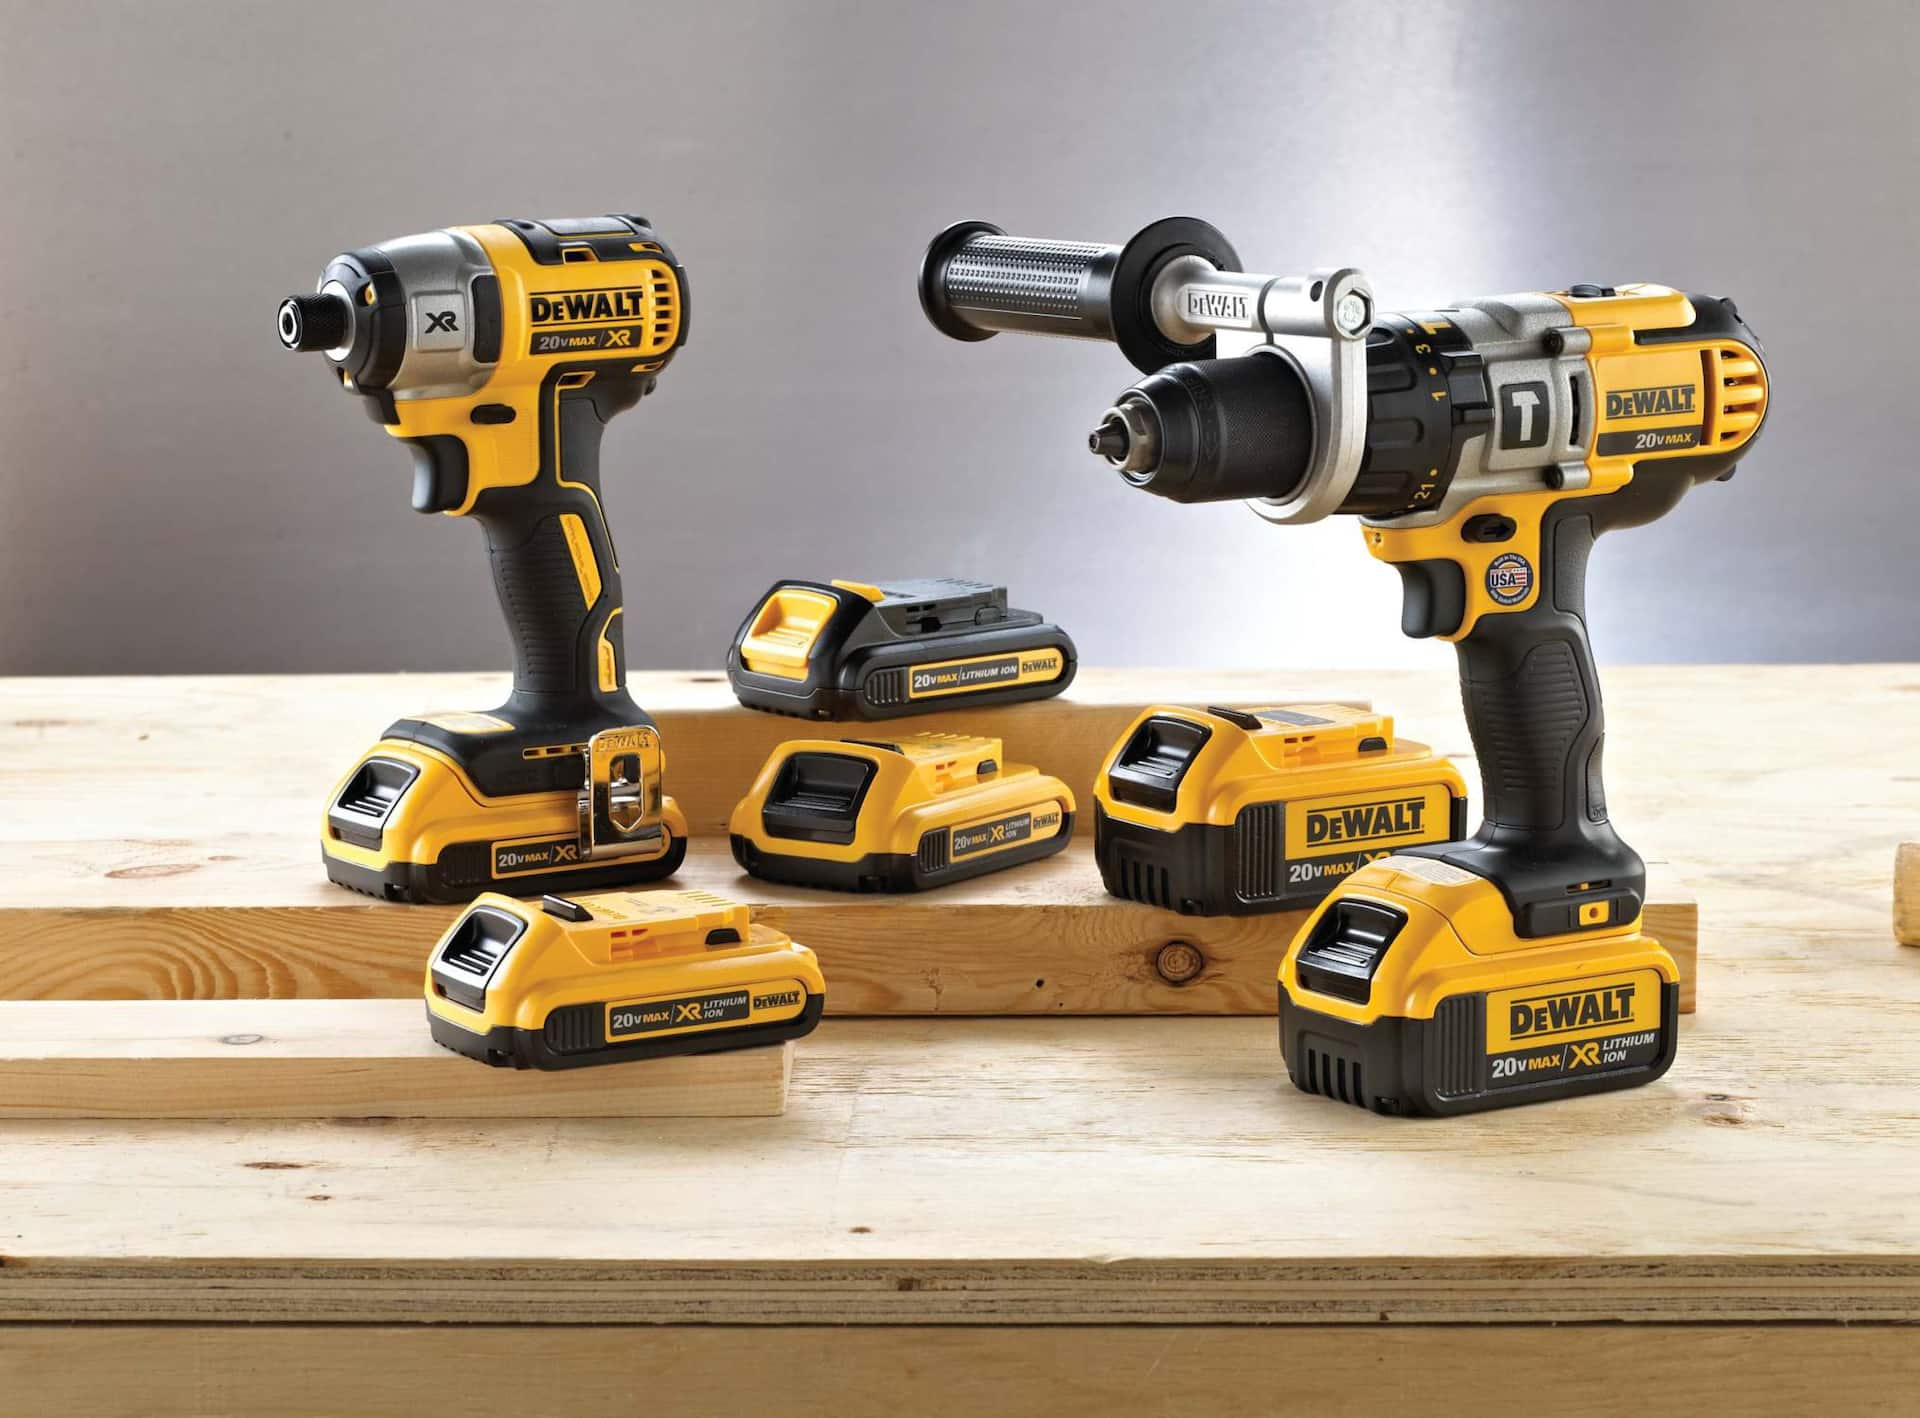 DEWALT DCF887D2 20V MAX XR Cordless 3-Speed Impact Driver Kit with Battery   Charger, 1/4-in Canadian Tire